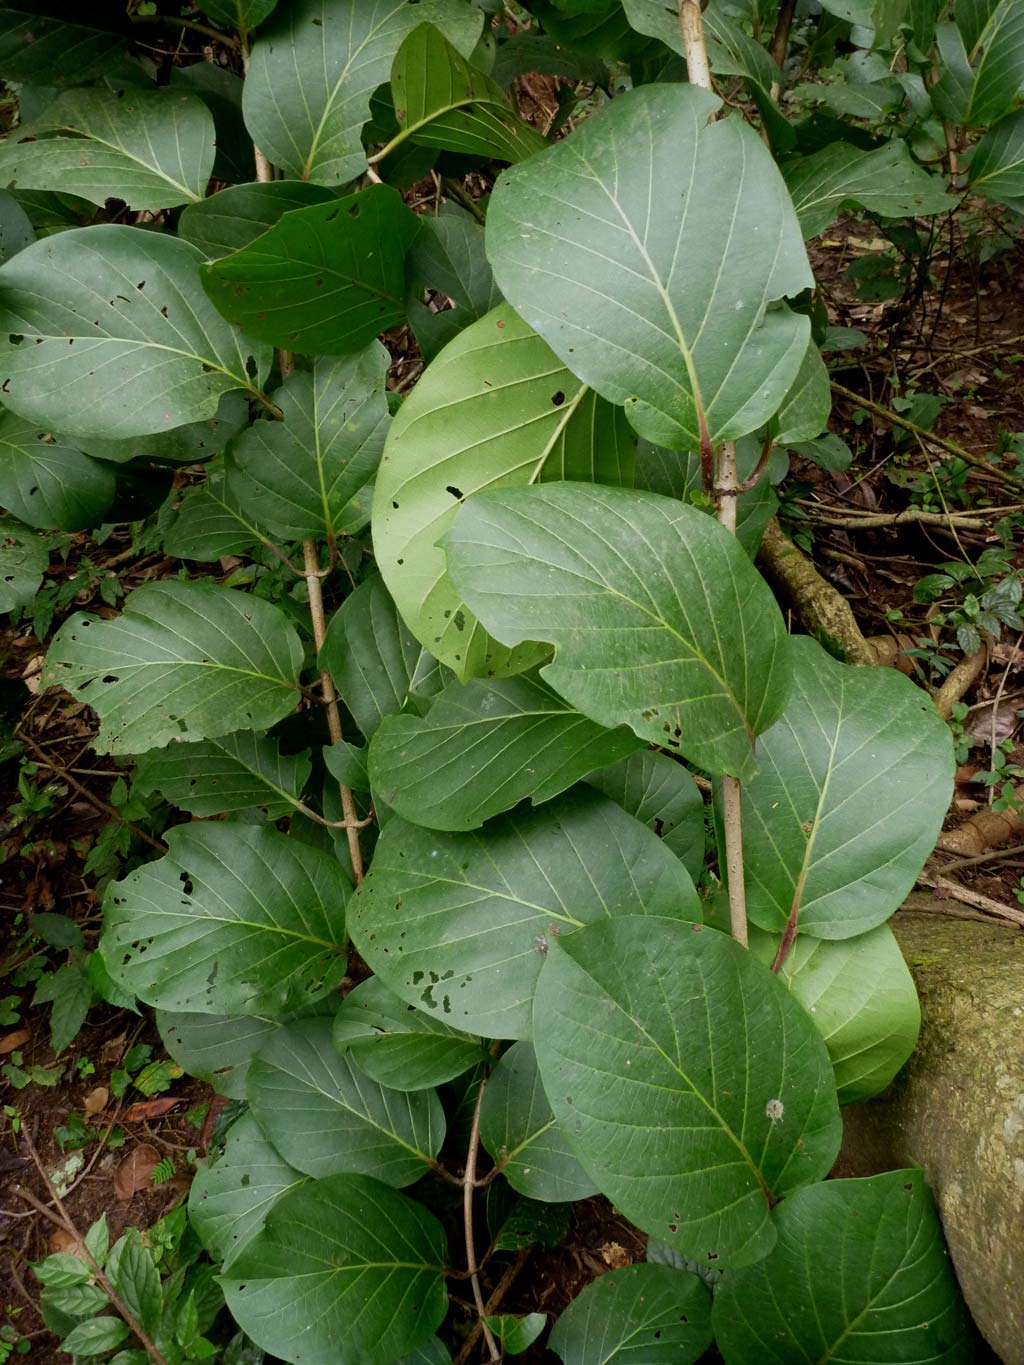 Picture of Sarcocephalus latifolius leaves. credits: D.Bown